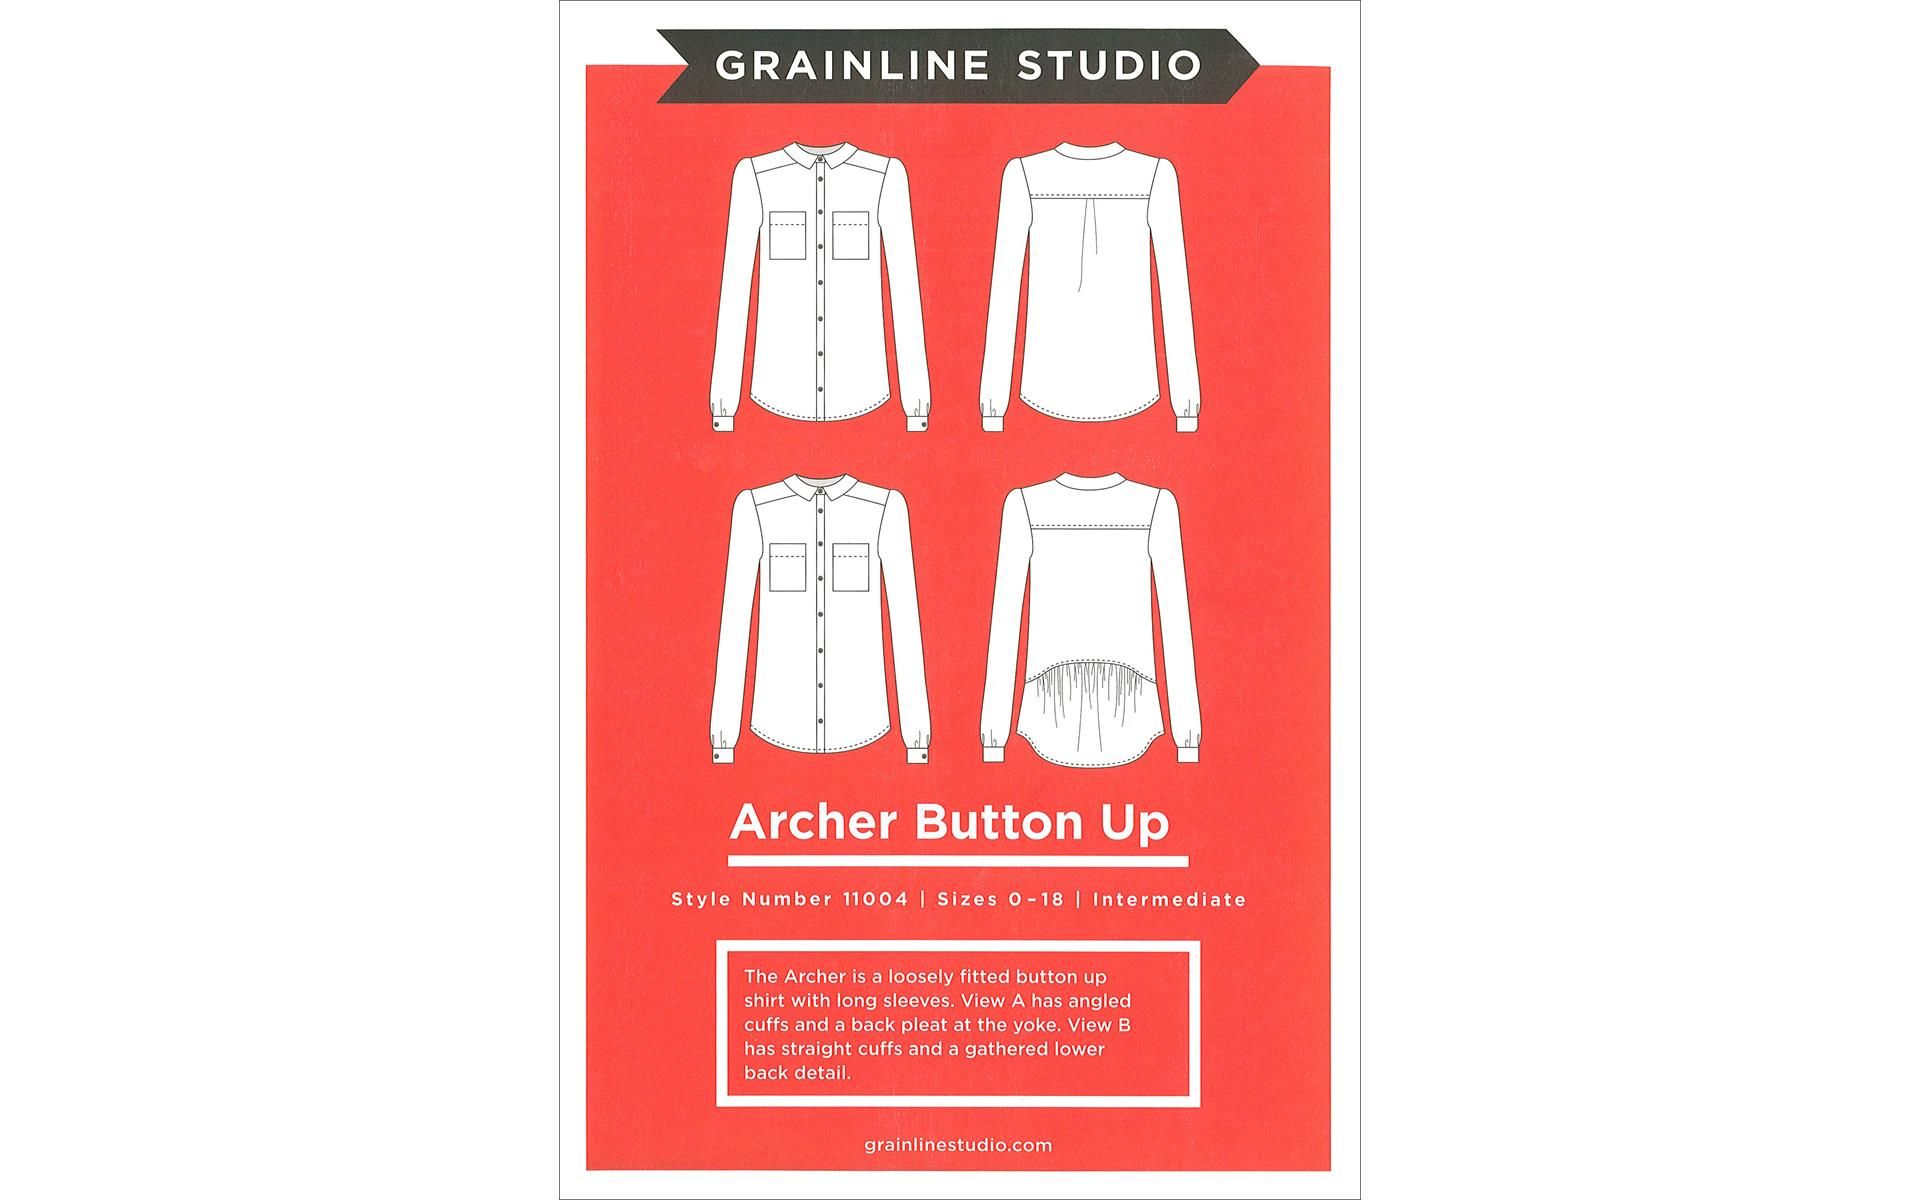 GrainLine Studio Archer Button Up Pattern- A loosely fitted button up shirt with long sleeves. View A has angled cuffs and a back pleat at yoke. View B has straight cuffs and a gathered lower back detail. Techniques include sewing a straight seam, setting sleeves, continuous button plackets, adding a shirt collar and buttons & buttonholes. Intermediate level pattern. Sizes 0 - 18.